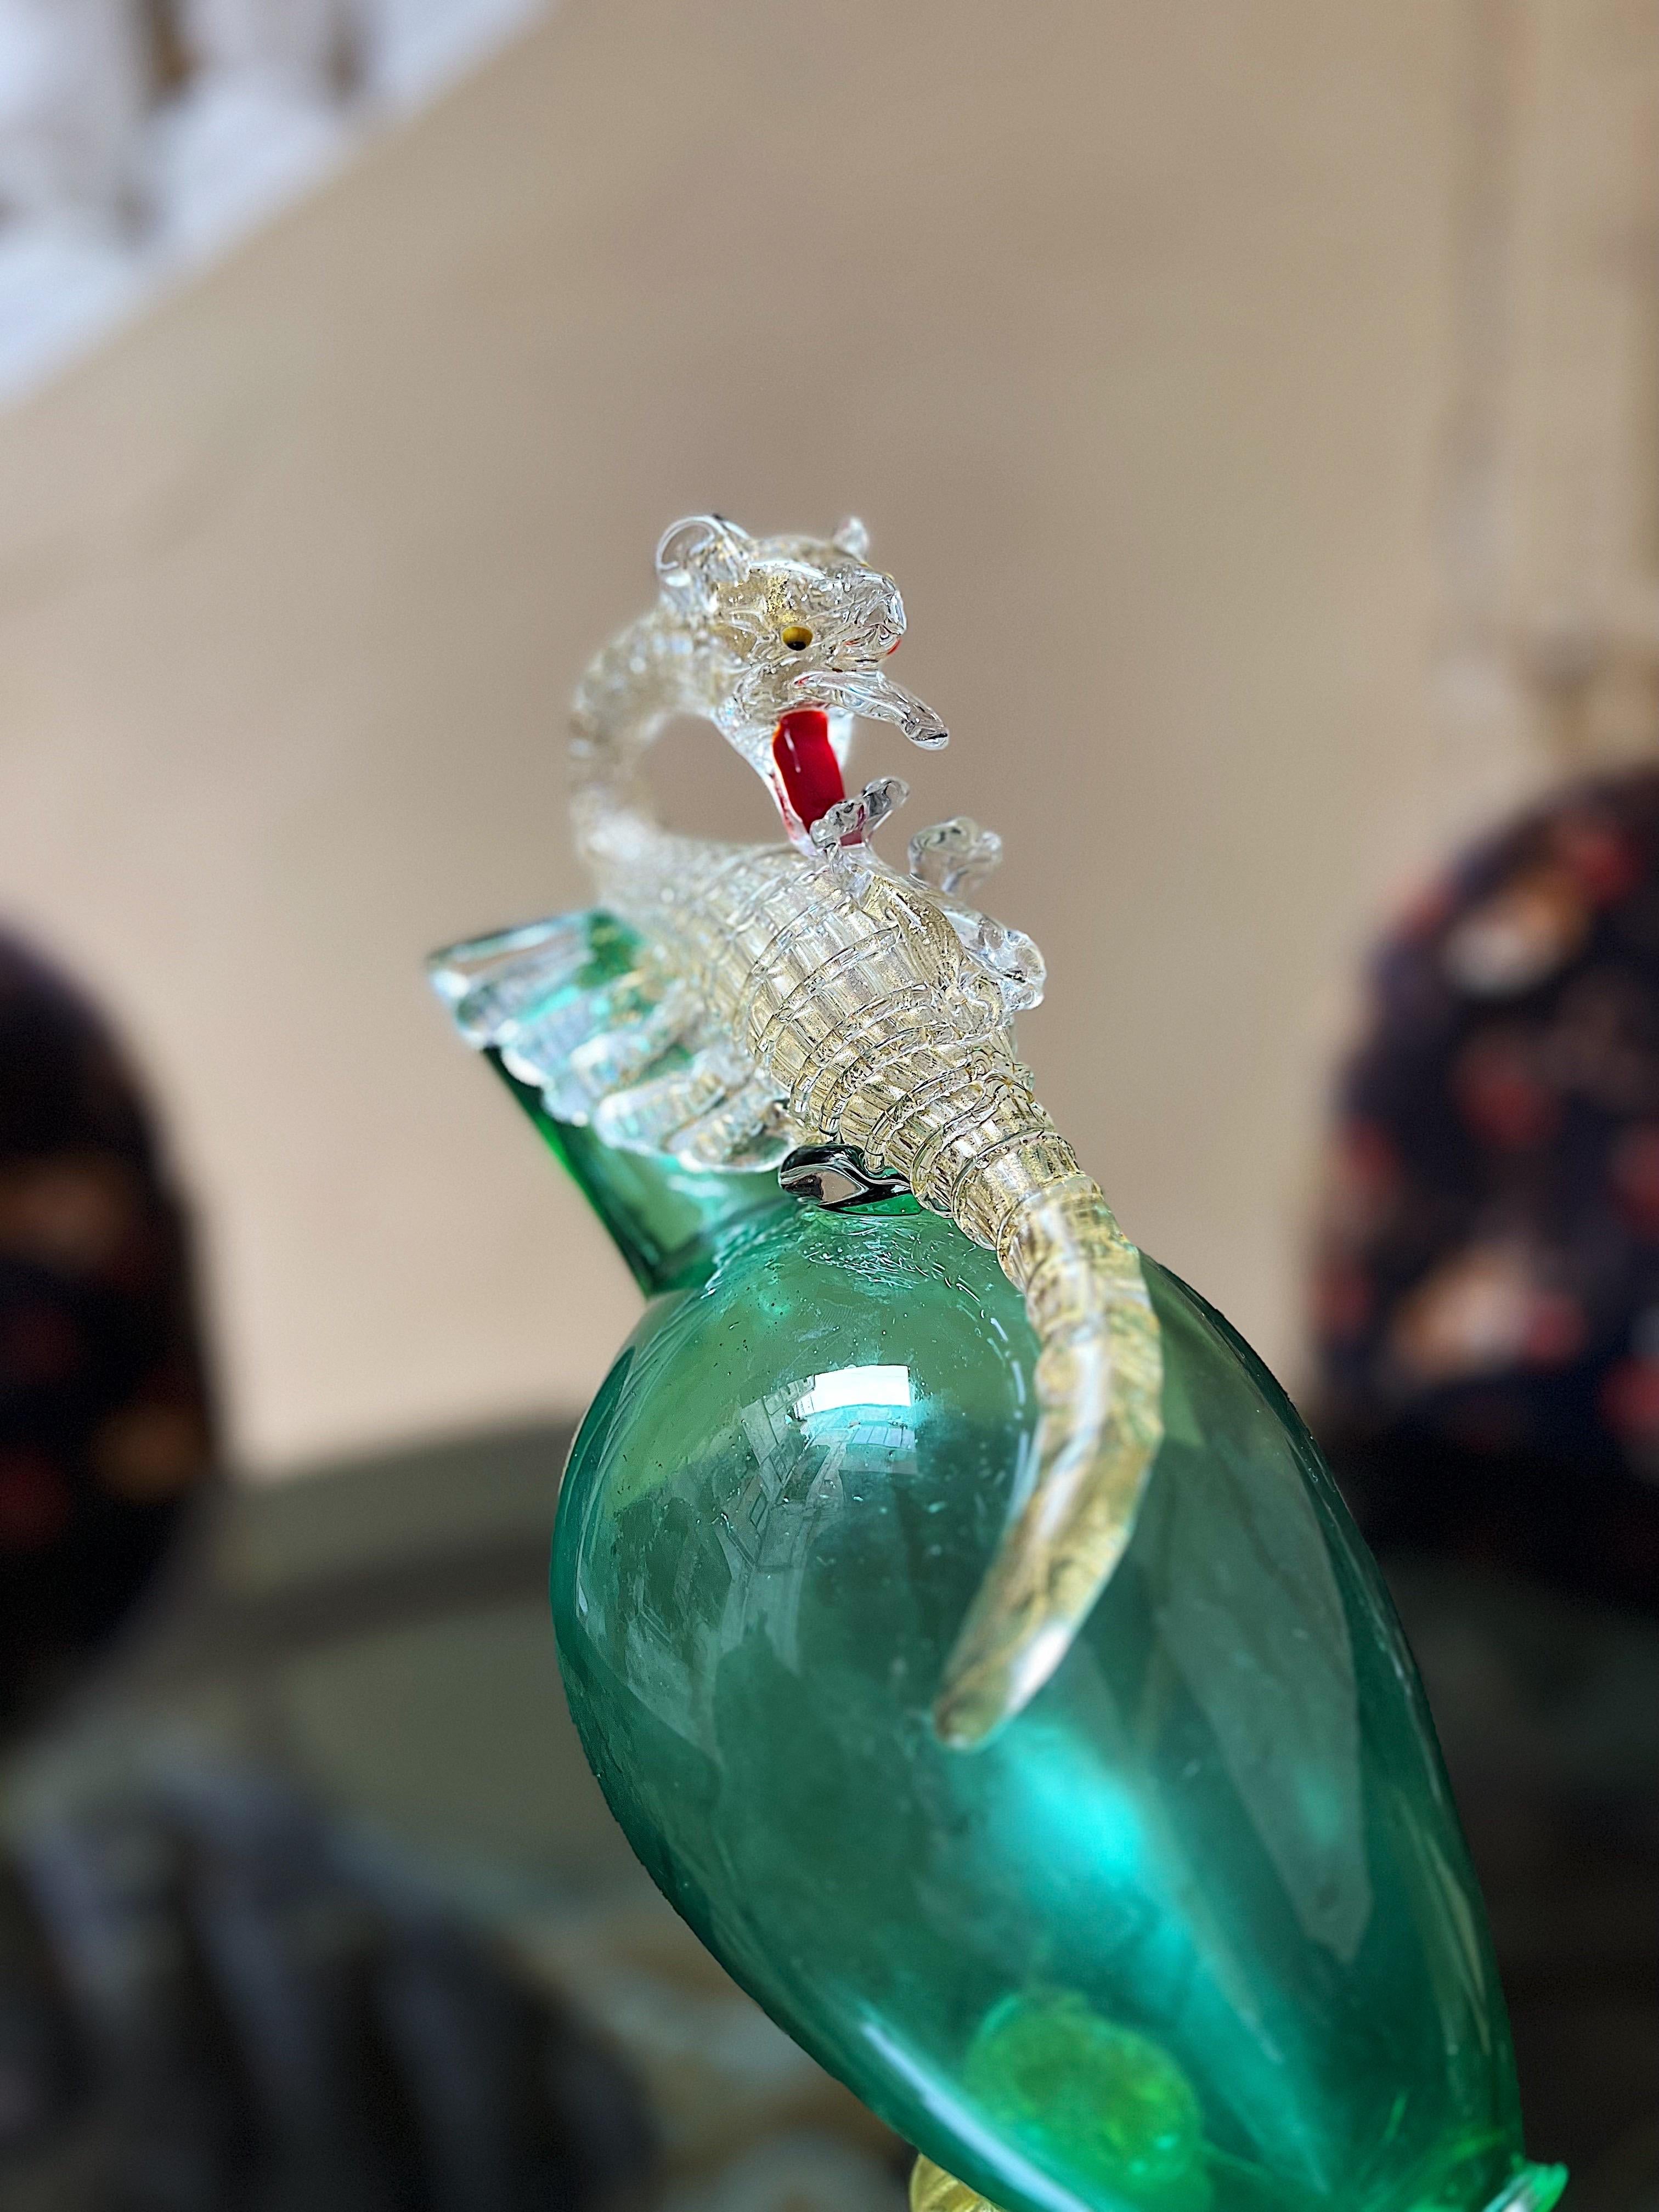 An exceptional example of Venetian glassblowing mastery, this large and impressive carrafe made by Antonio Salviati is sure to impress! 

All handblown elements are fused together to create this masterpiece; the caraffe is in a vibrant apple